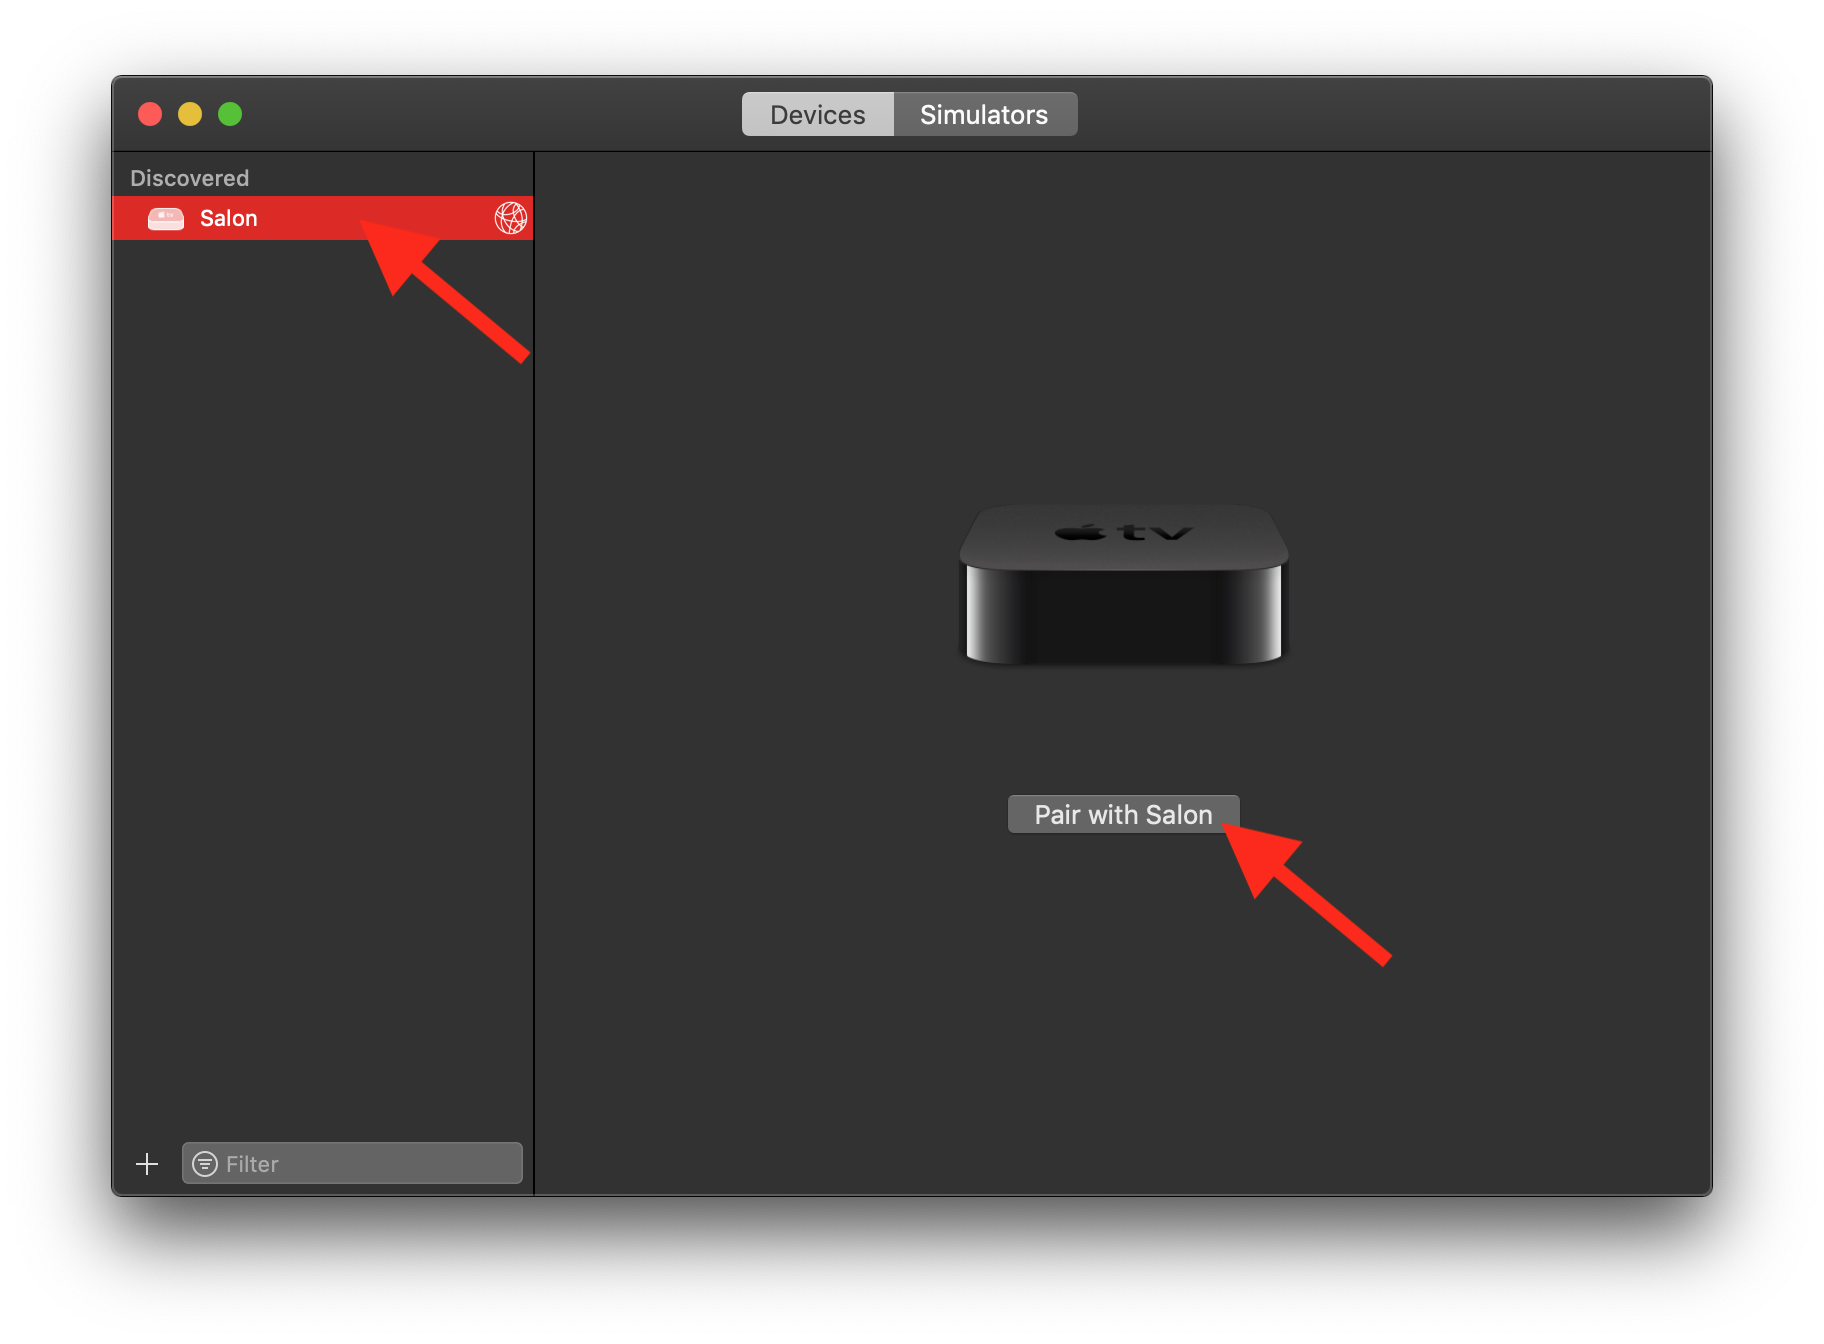 Step 6: Select your Apple TV on the left panel and click "Pair".